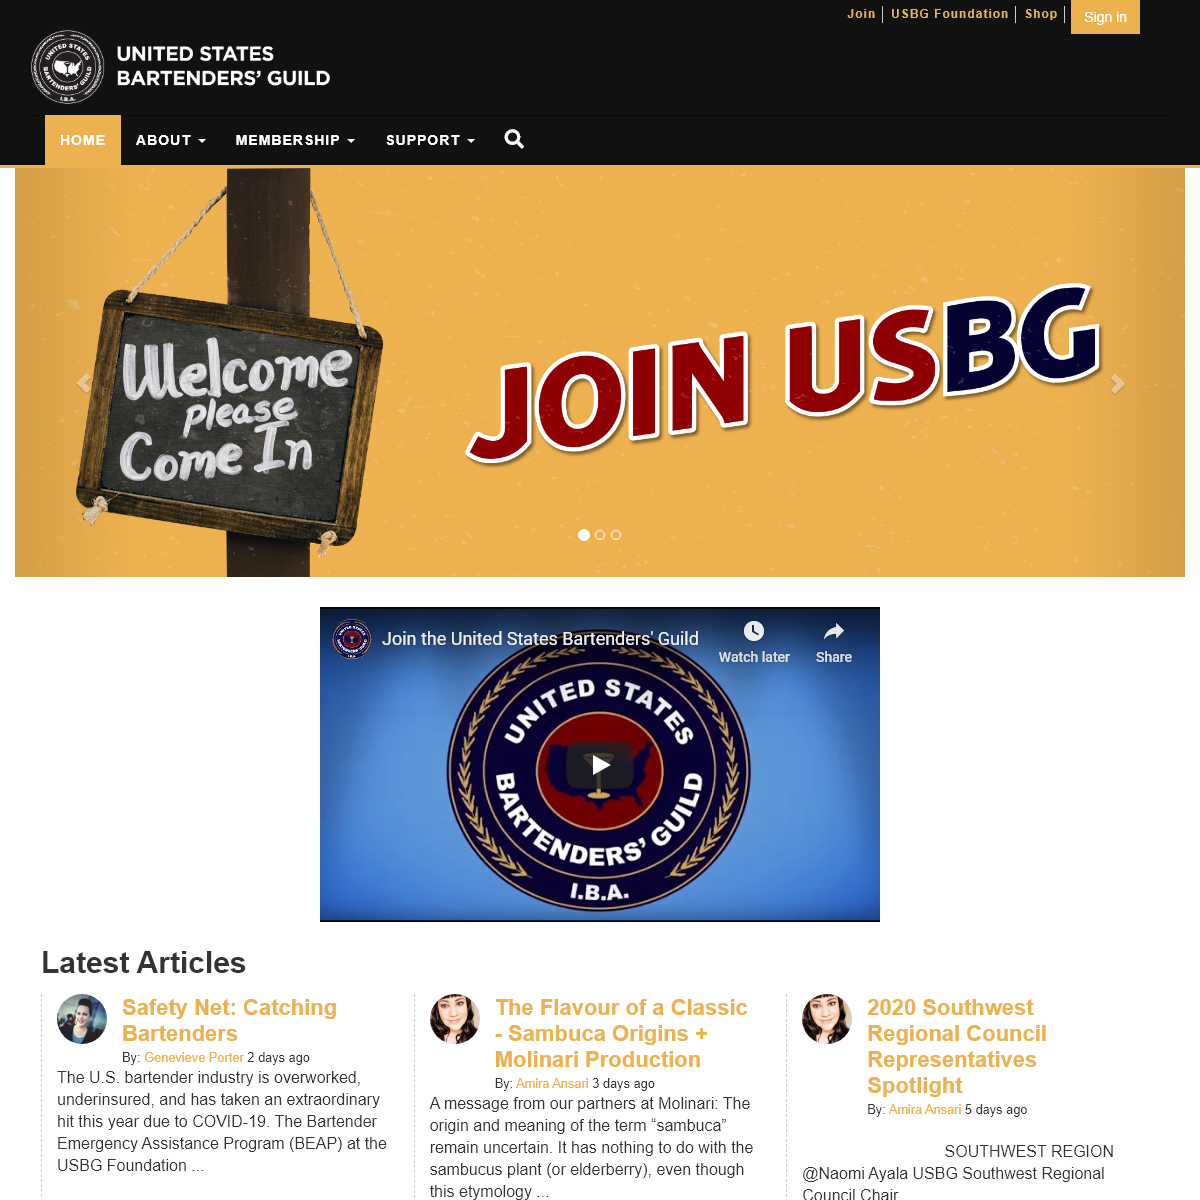 A complete backup of usbg.org